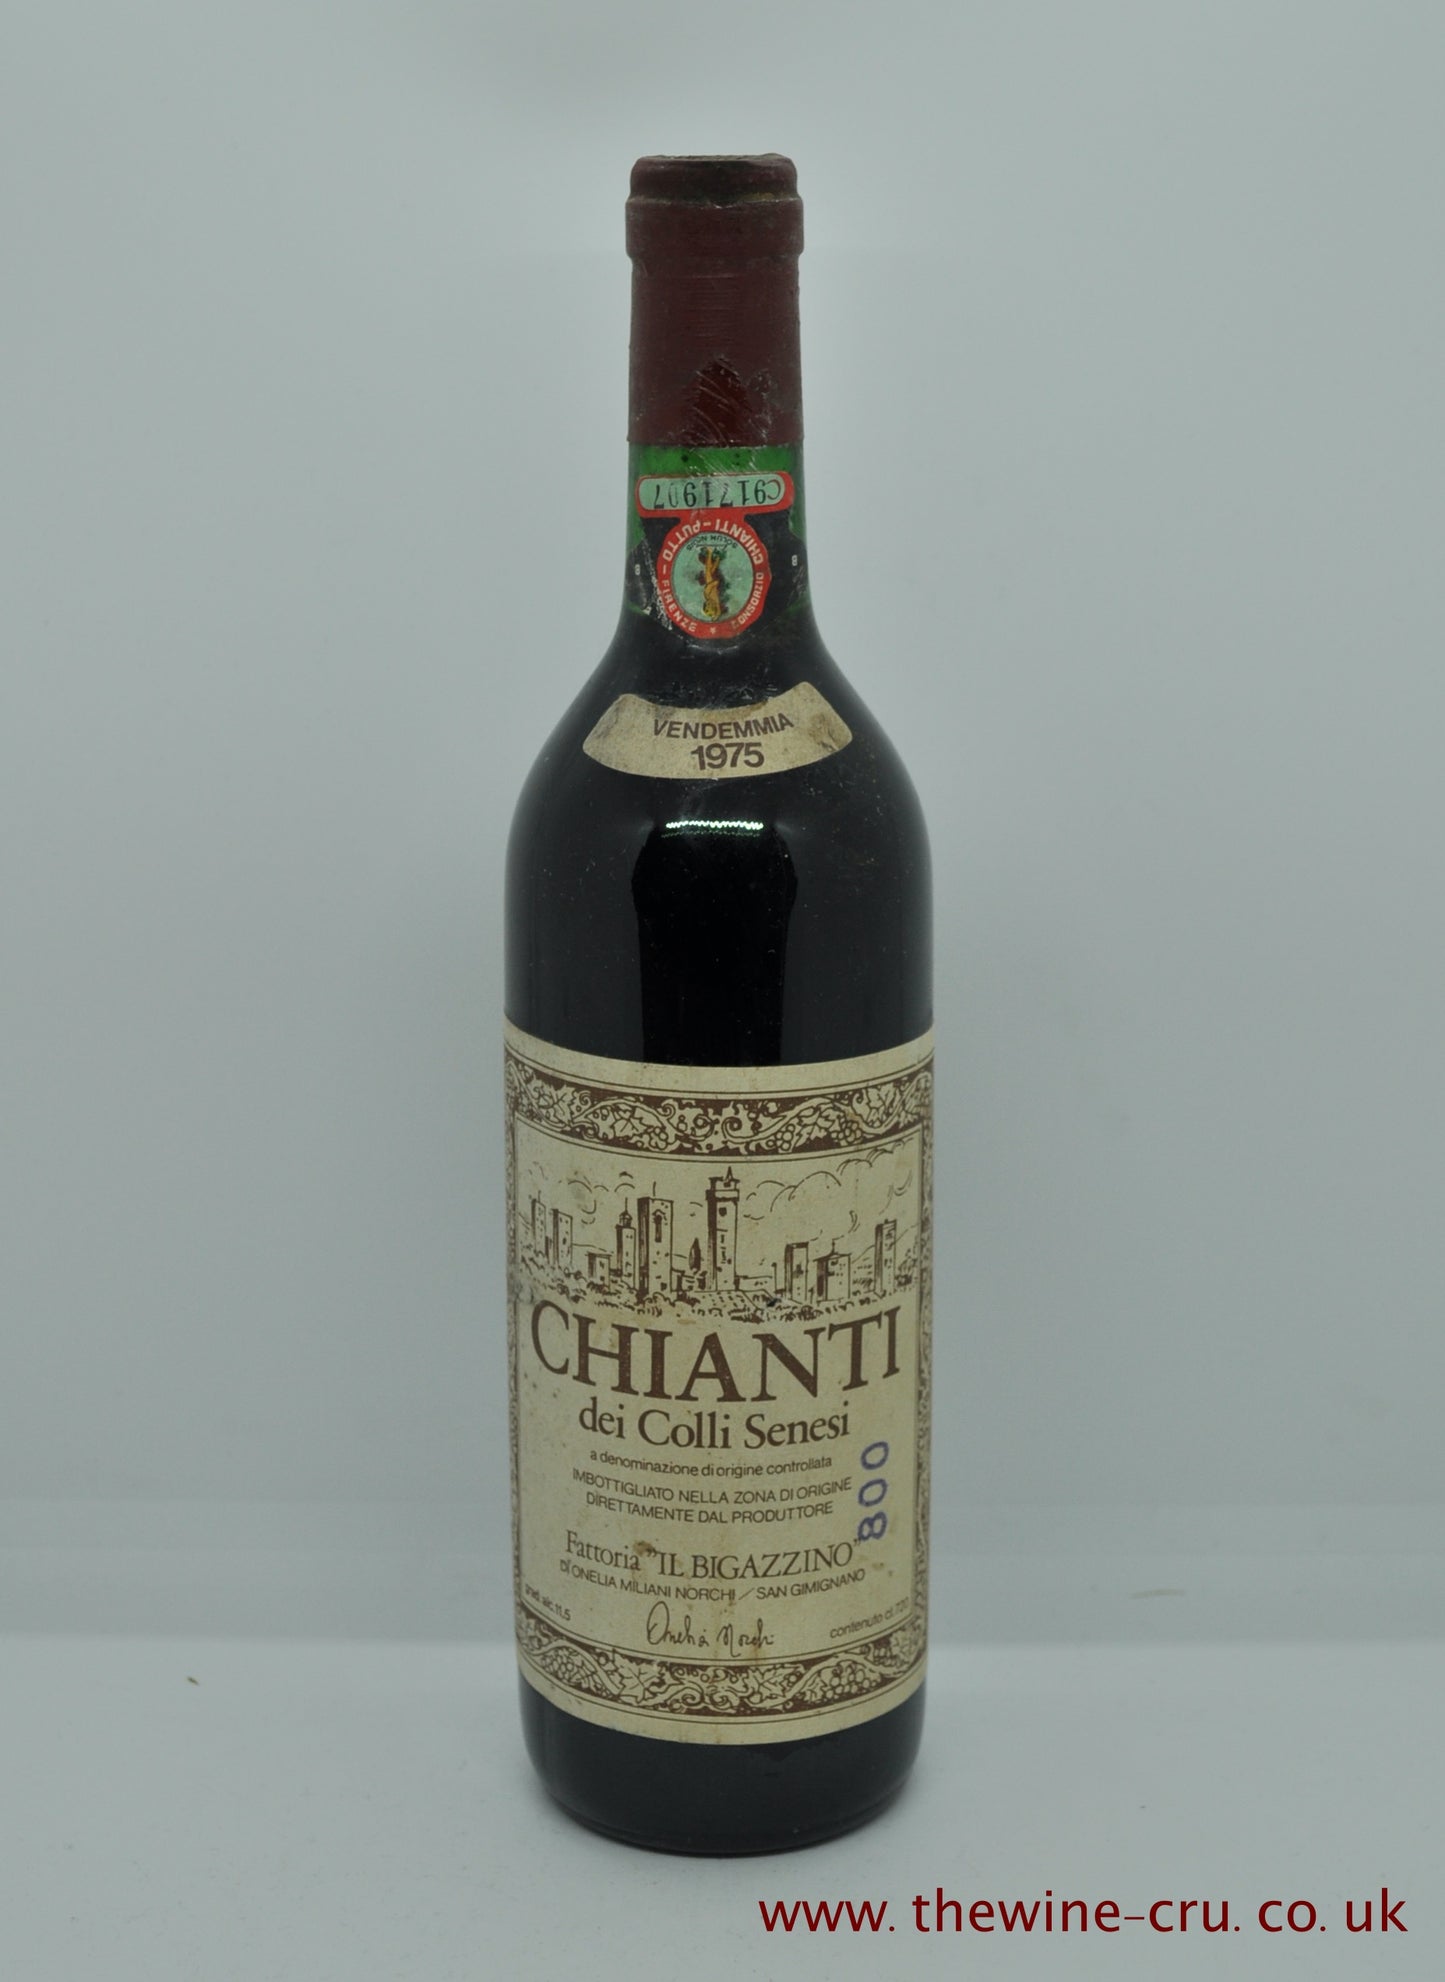 1975 vintage re wine. Chianti Dei Colli Senesi Fattoria Il Bigazzino. Italy. The bottle is in good condition with the level being in the neck. Immediate delivery. free local delivery. Gift wrapping available.